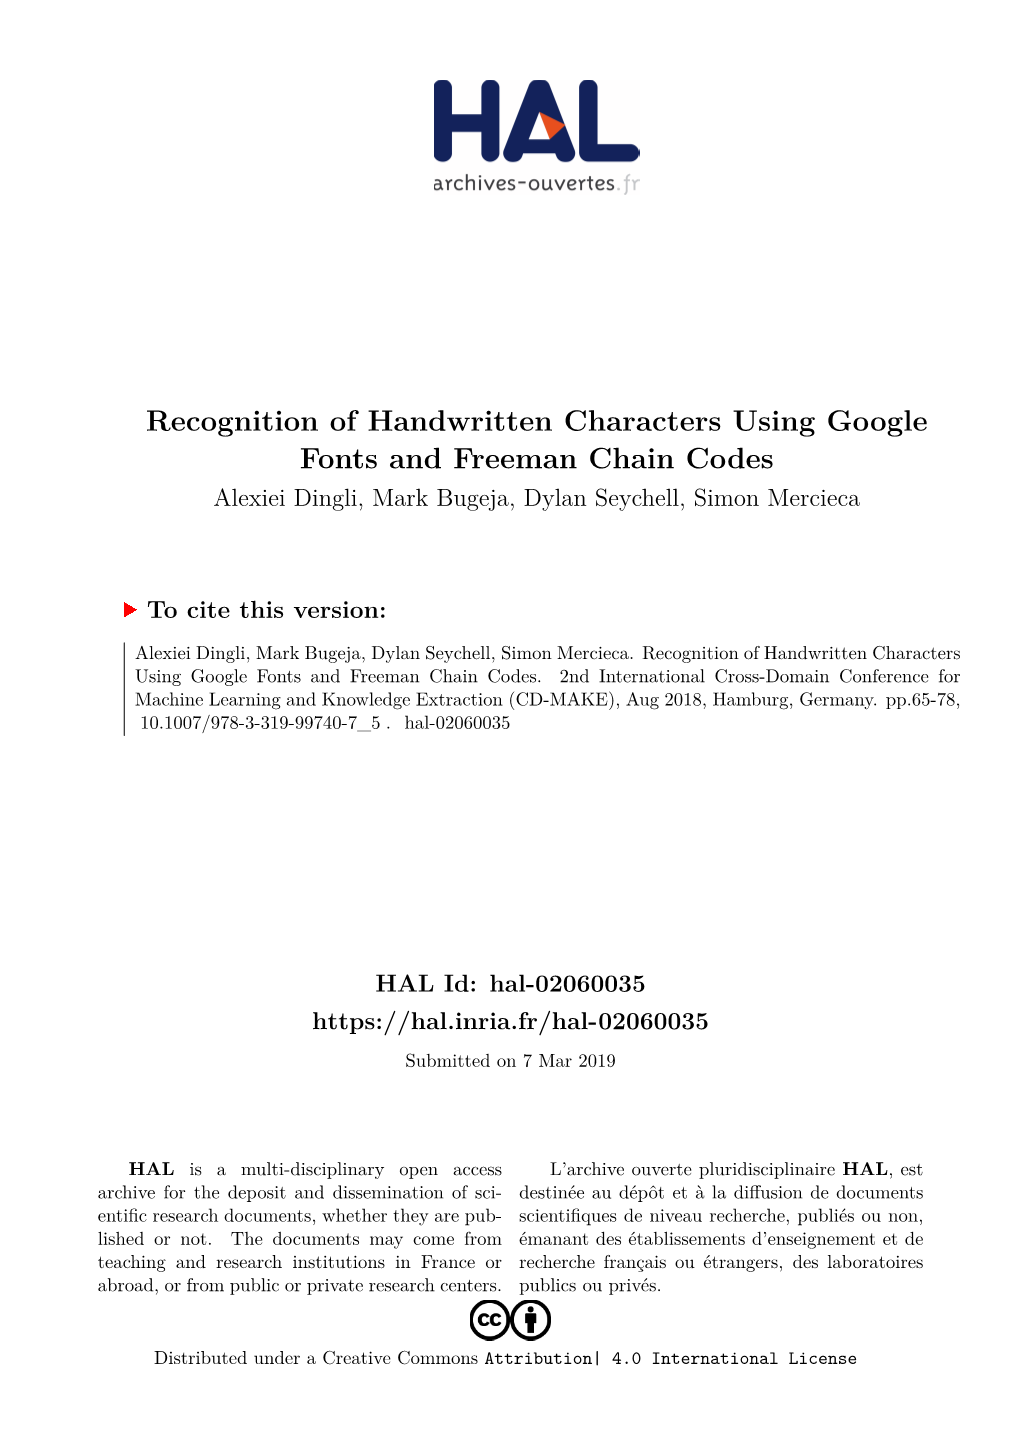 Recognition of Handwritten Characters Using Google Fonts and Freeman Chain Codes Alexiei Dingli, Mark Bugeja, Dylan Seychell, Simon Mercieca